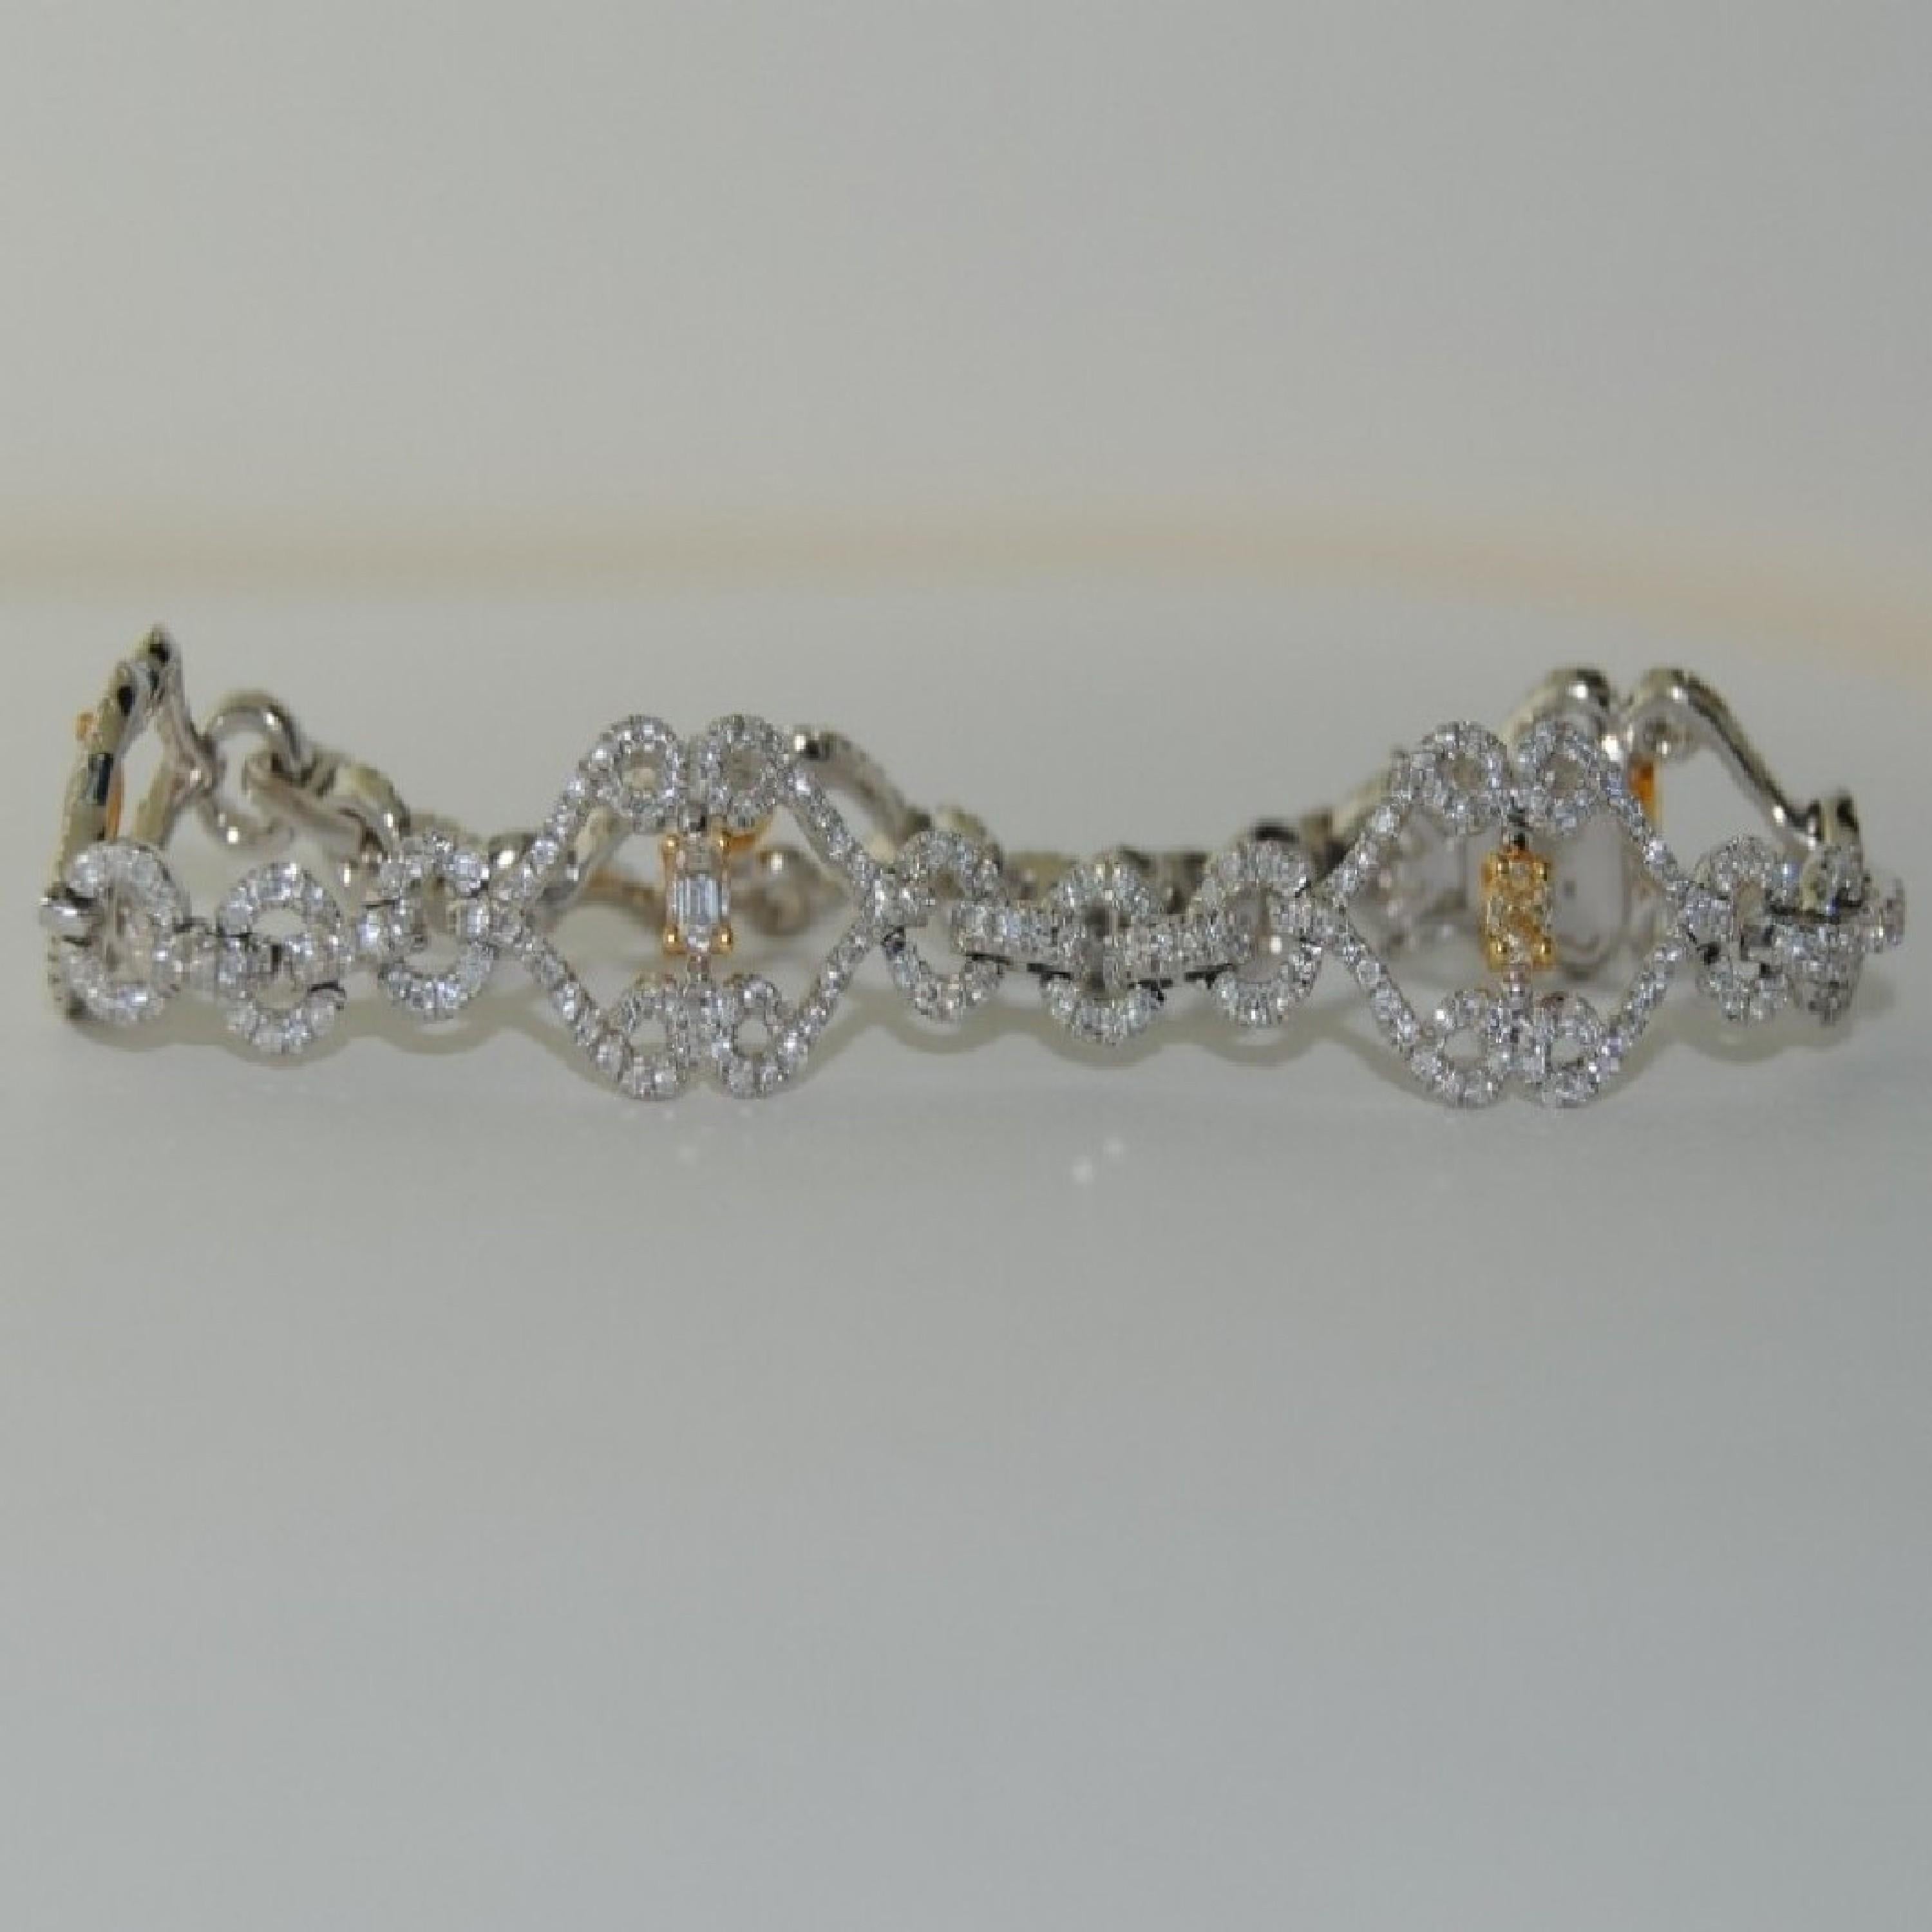 This 14-karat White Gold Bracelet has 433 Round Diamonds that weigh 1.93 carats and 5  Fancy Diamonds/Yellow that weigh 1.21 carats. The cut of the Yellow Diamonds are Oval, Emerald, and Pear.
Size is 7 inches
New Bracelet